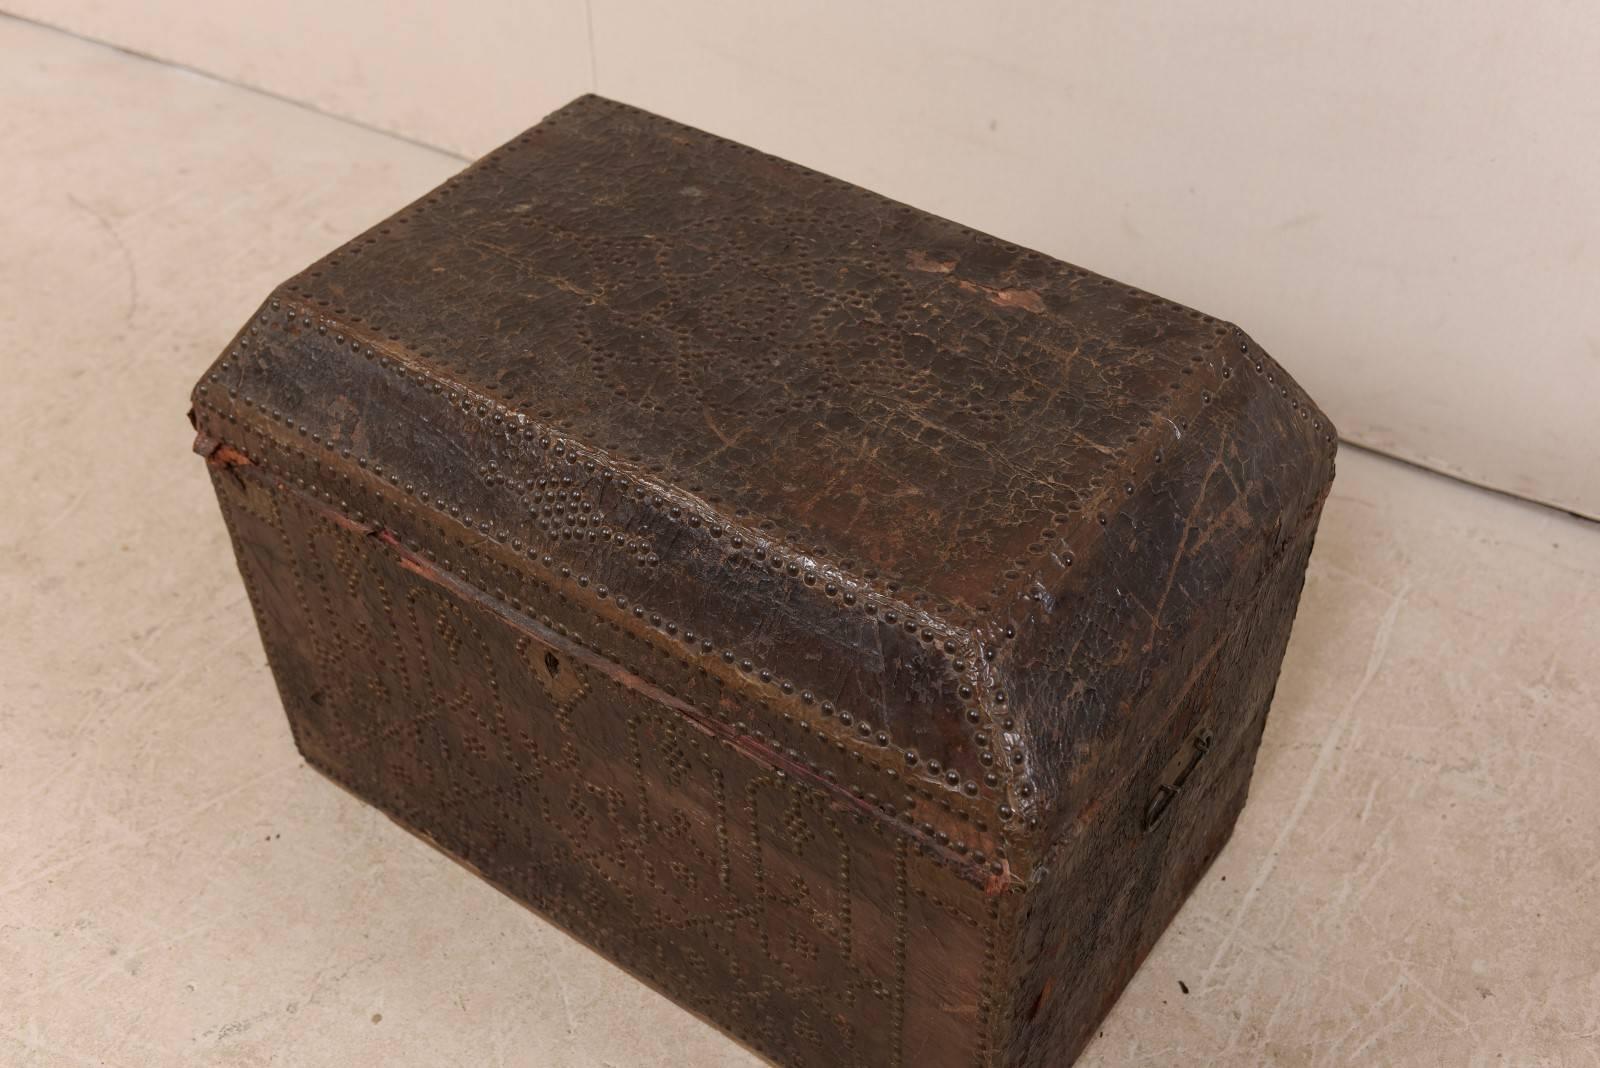 Spanish Colonial 19th Century Spanish Leather Covered Trunk Ornately Decorated with Brass Studs